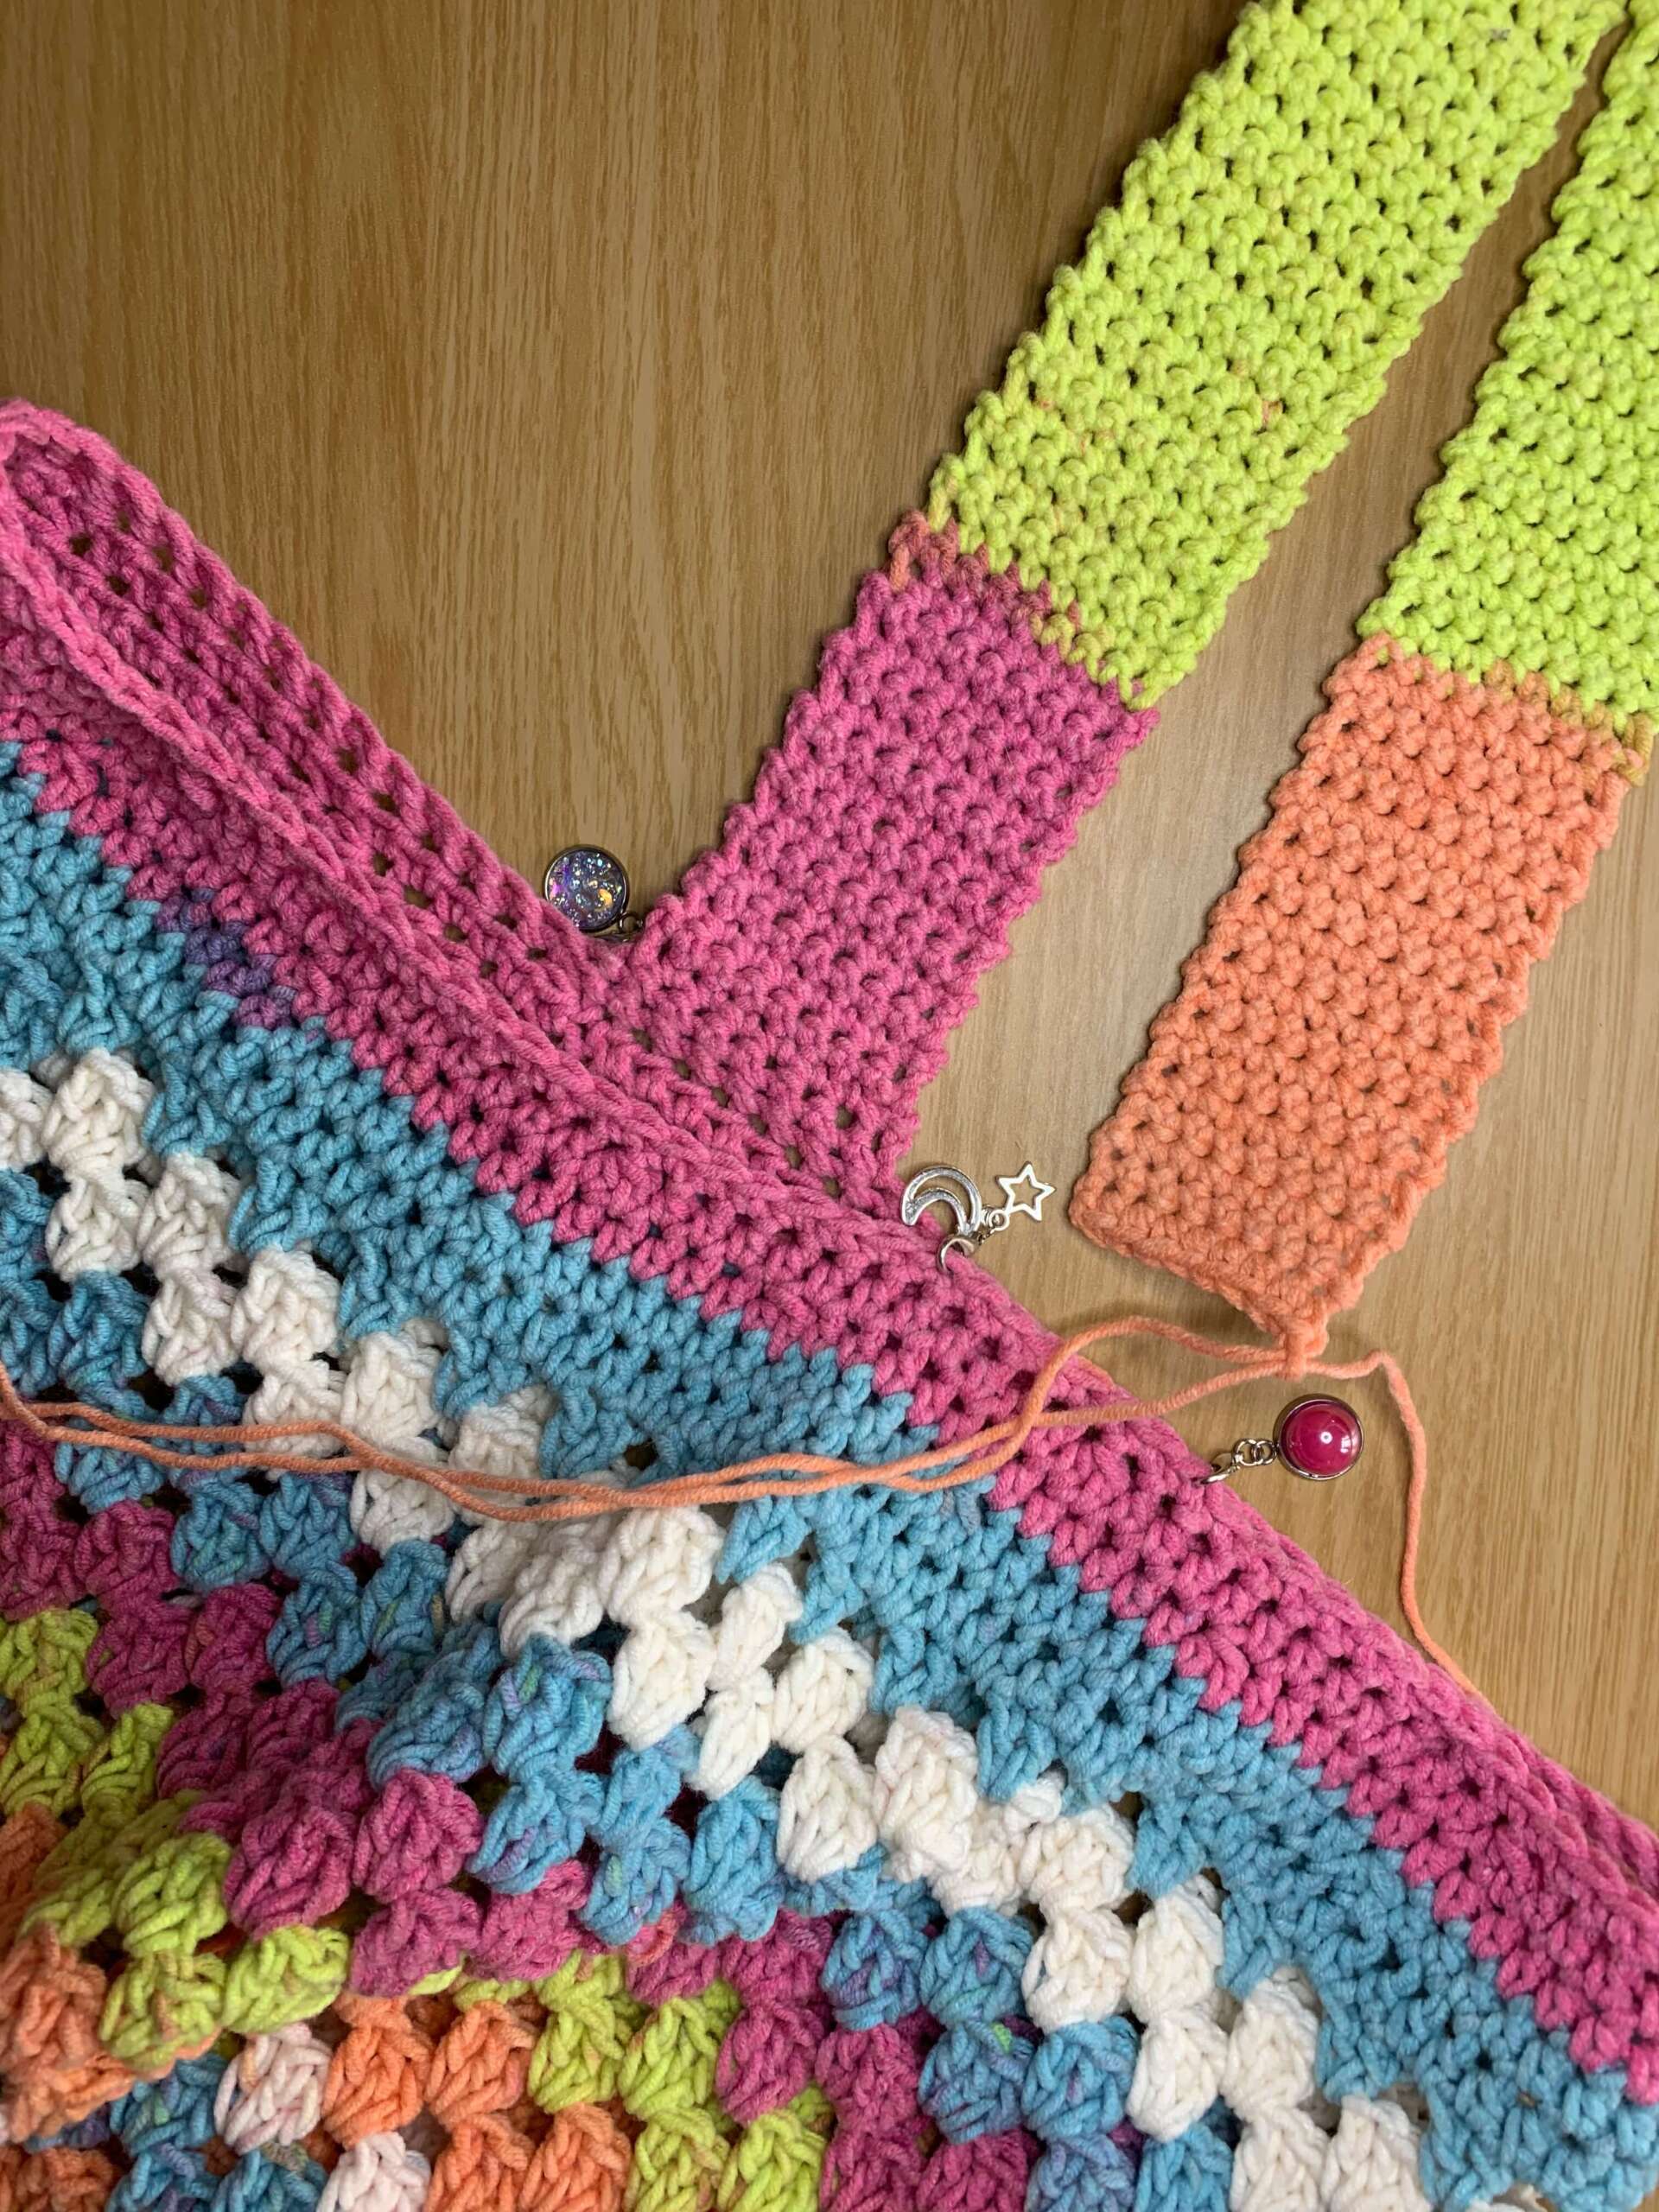 How to add the crochet handle